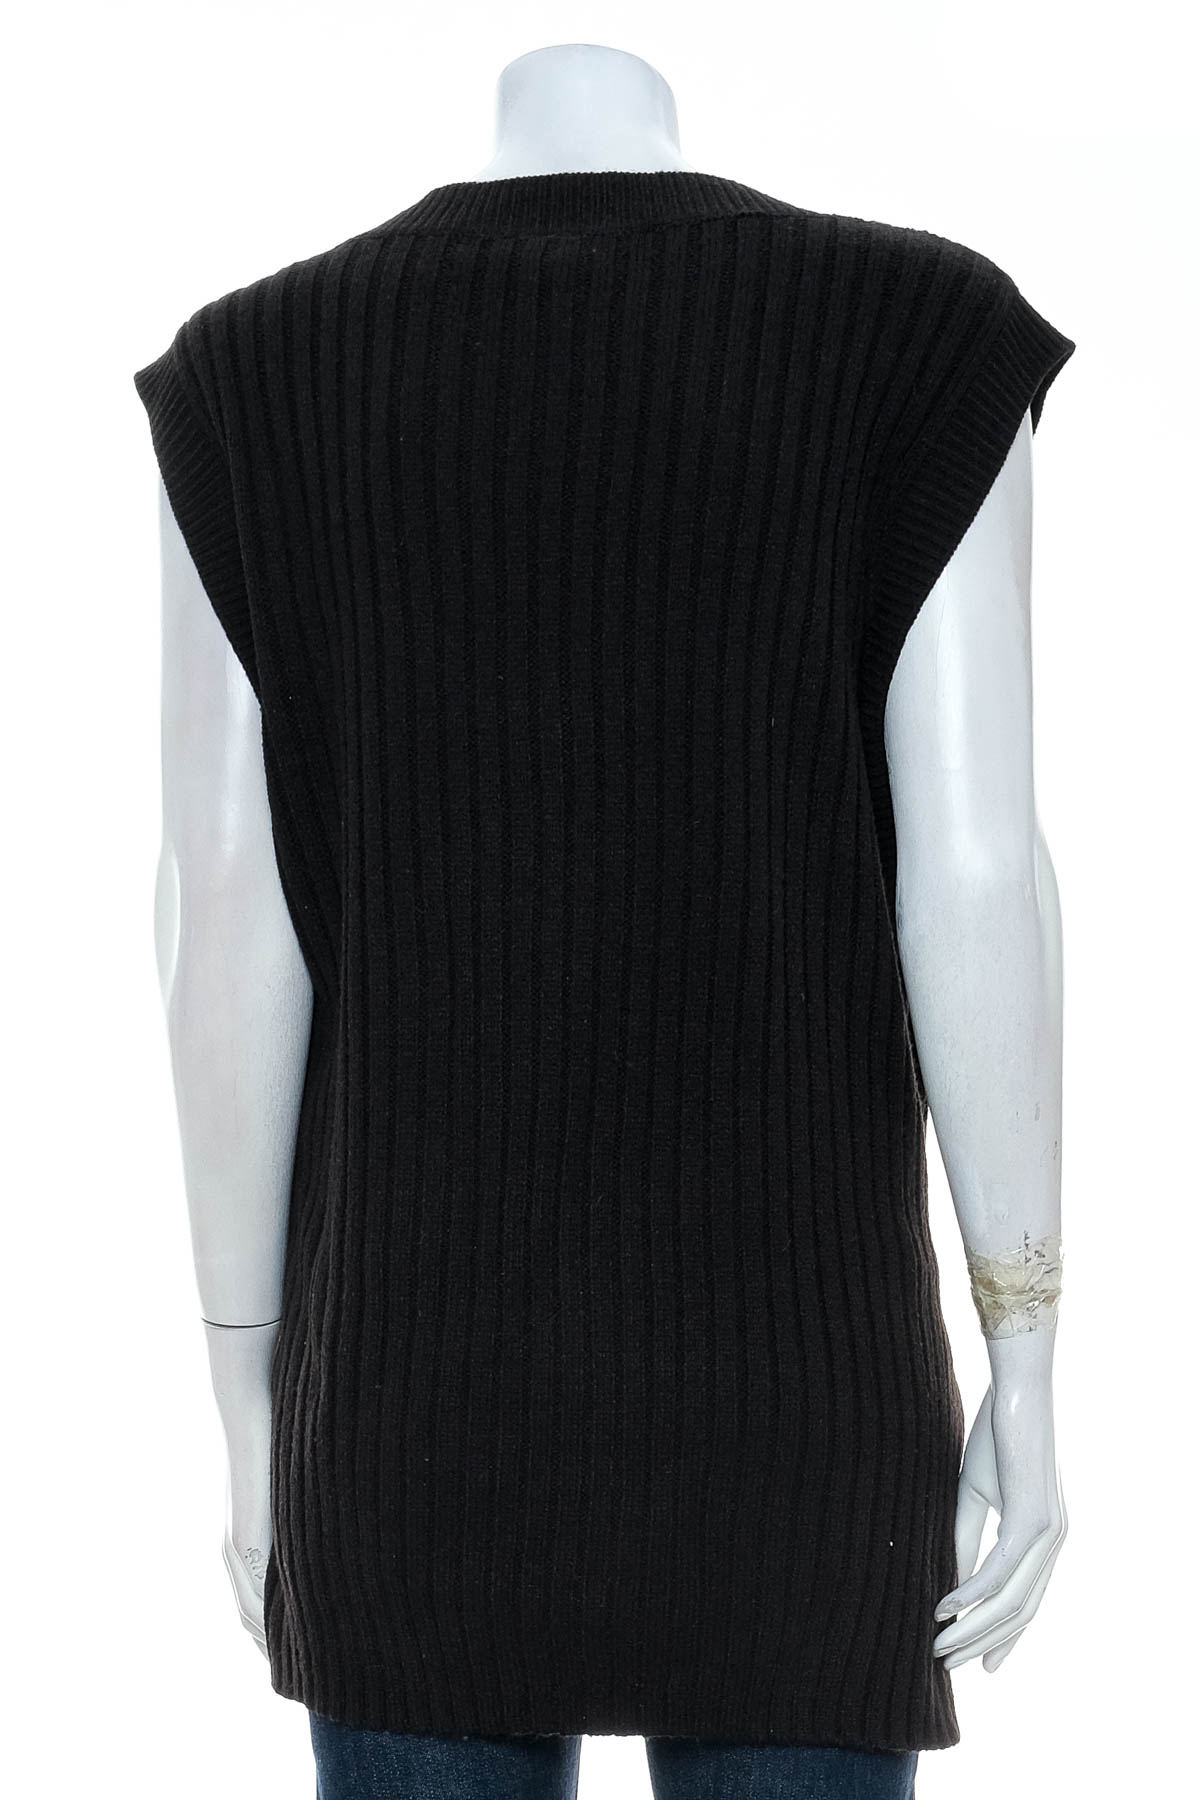 Women's sweater - DIVIDED - 1